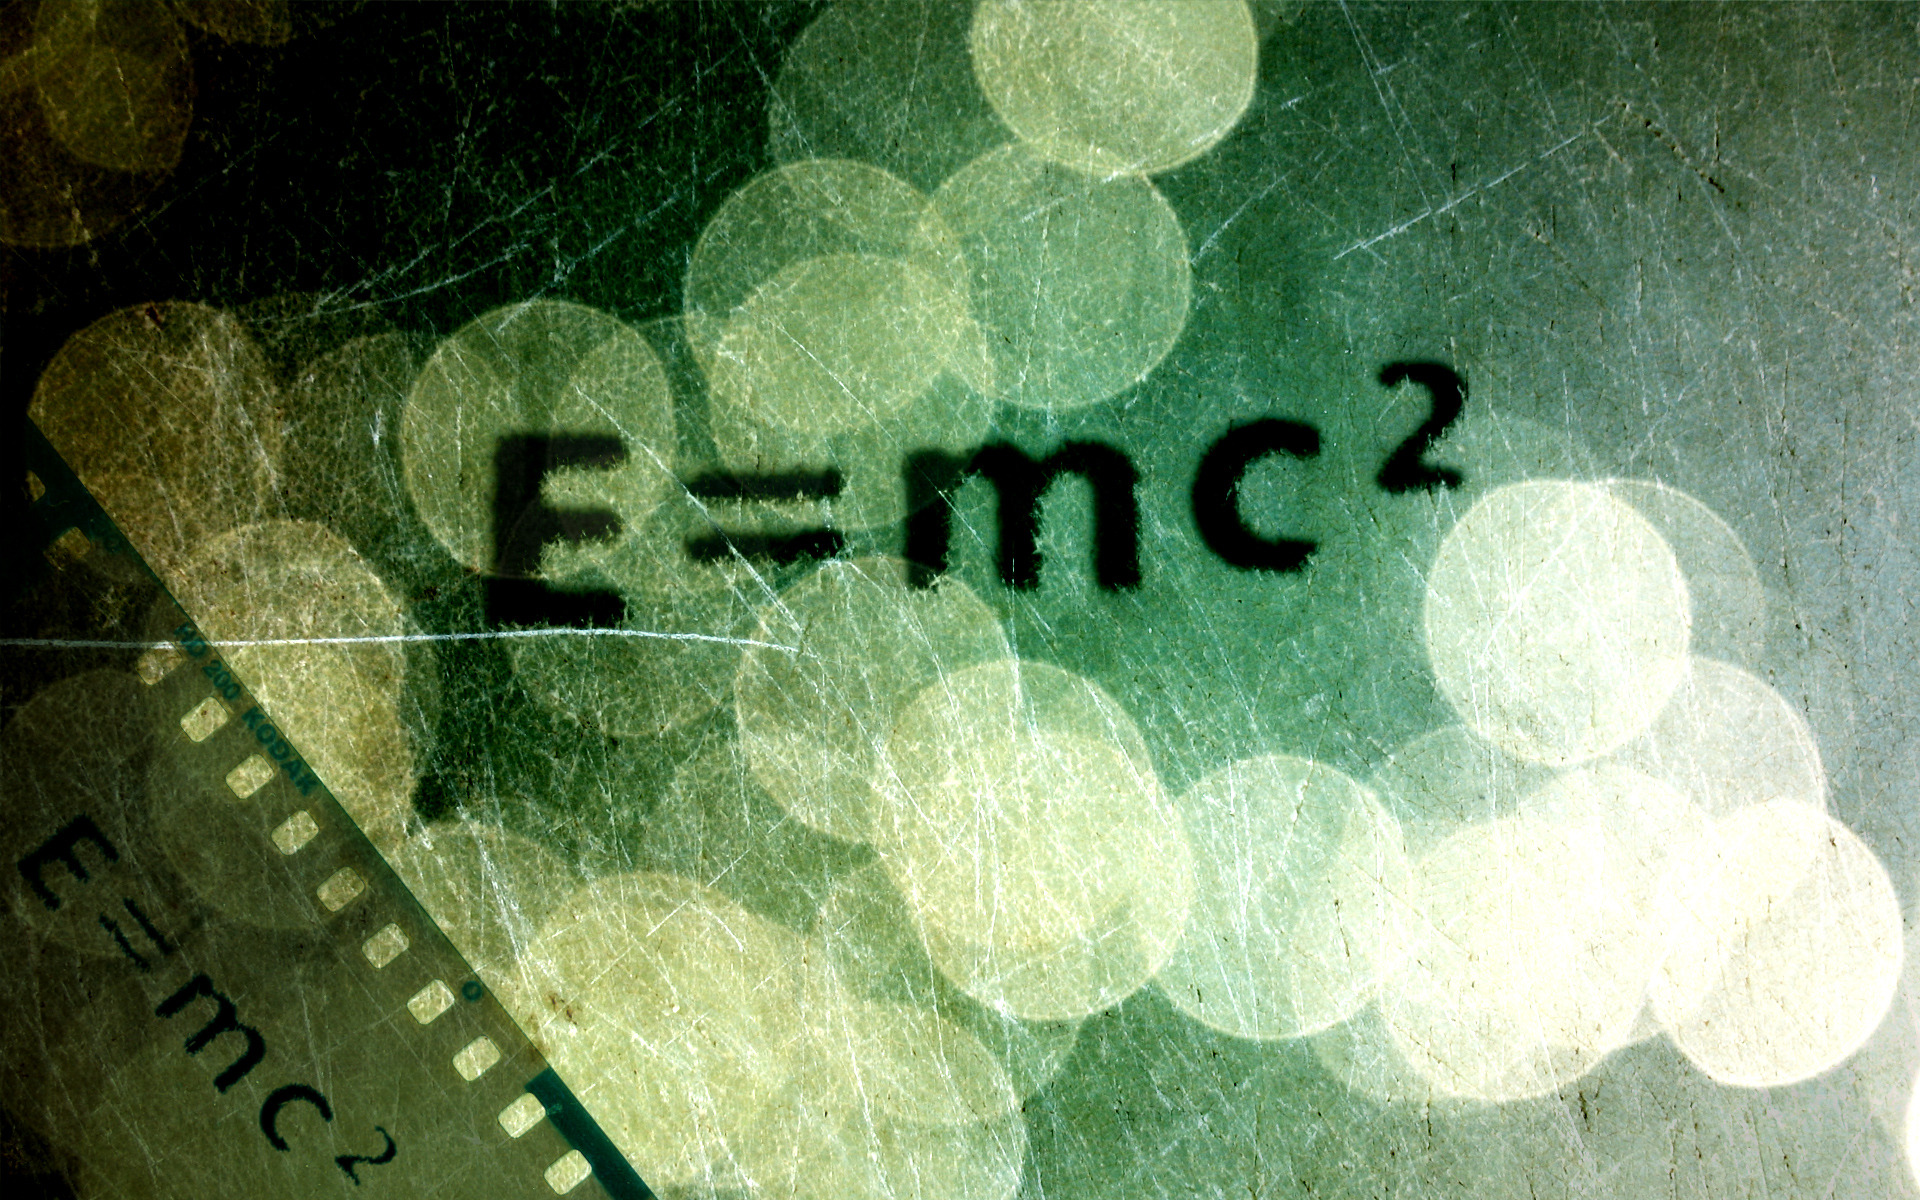 Theory Of Relativity Wallpapers Wallpaper Cave 0644